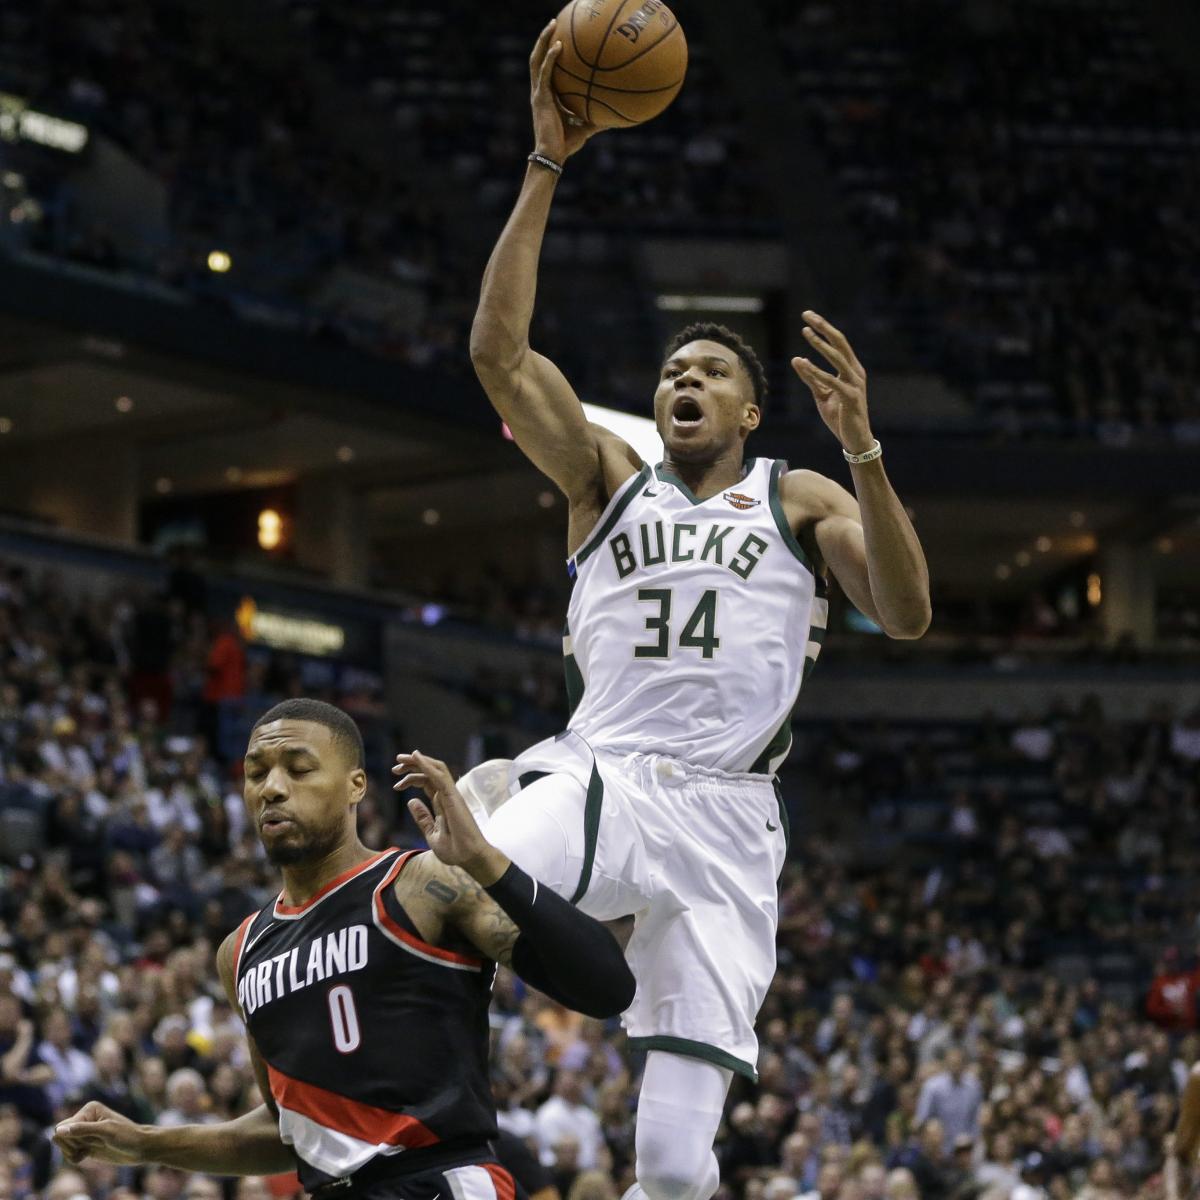 After acquiring Damian Lillard, the pressure is on Giannis Antetokounmpo  and Bucks to win another NBA title